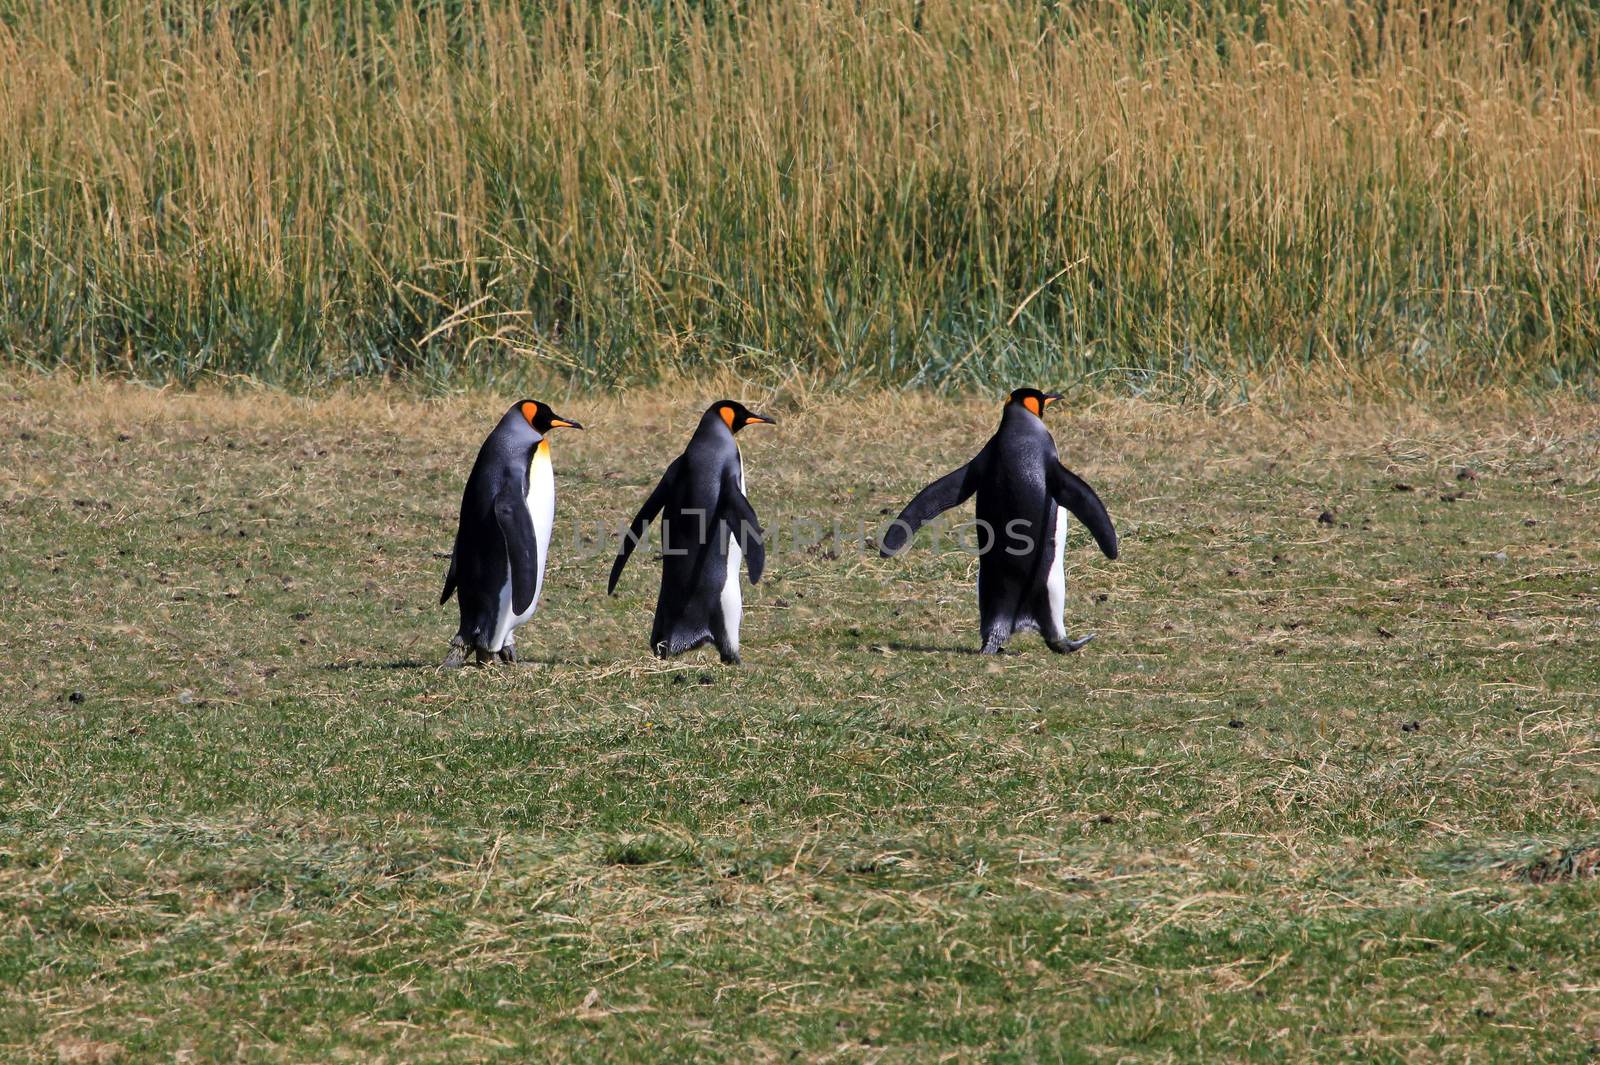 King penguins living wild at Parque Pinguino Rey, Patagonia, Chile by cicloco